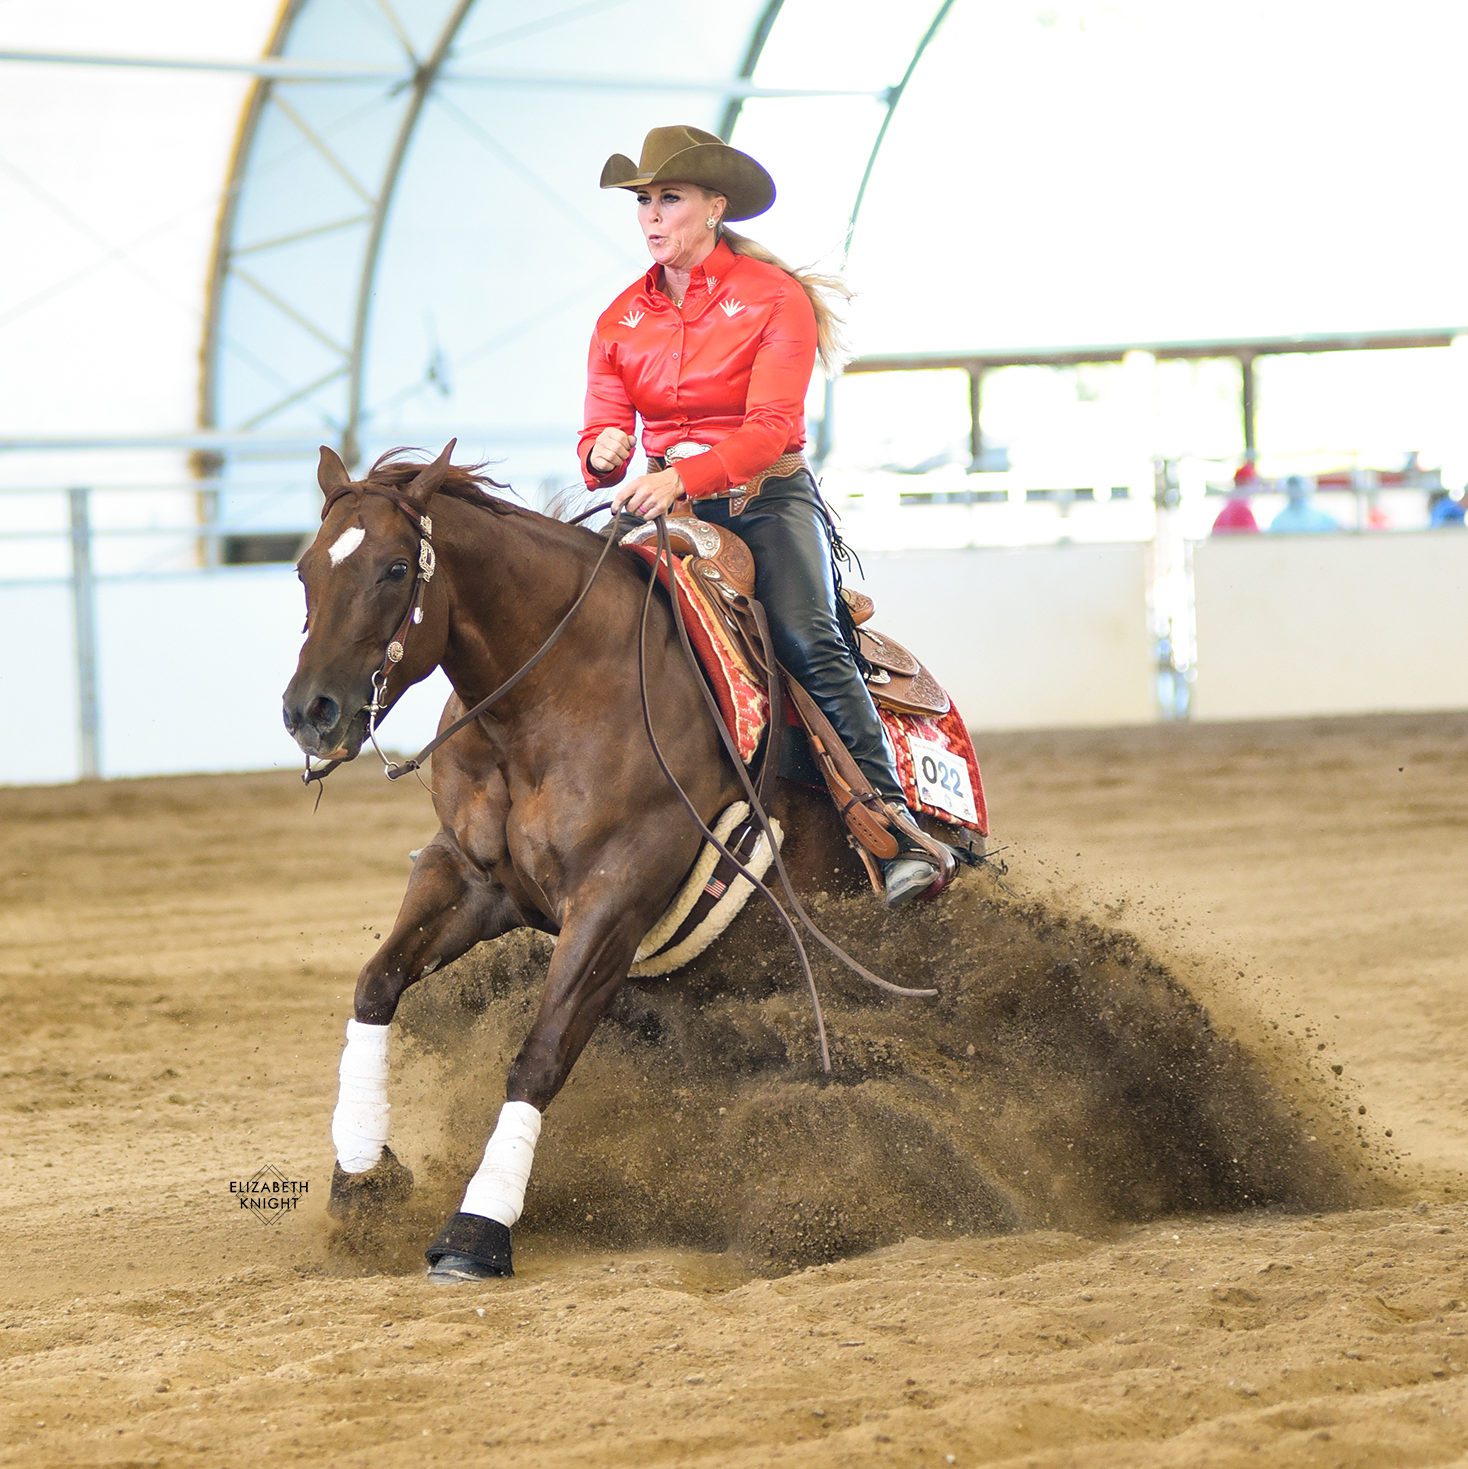 Quarter horse reining gelding competing at the Low Roller Reining Classic